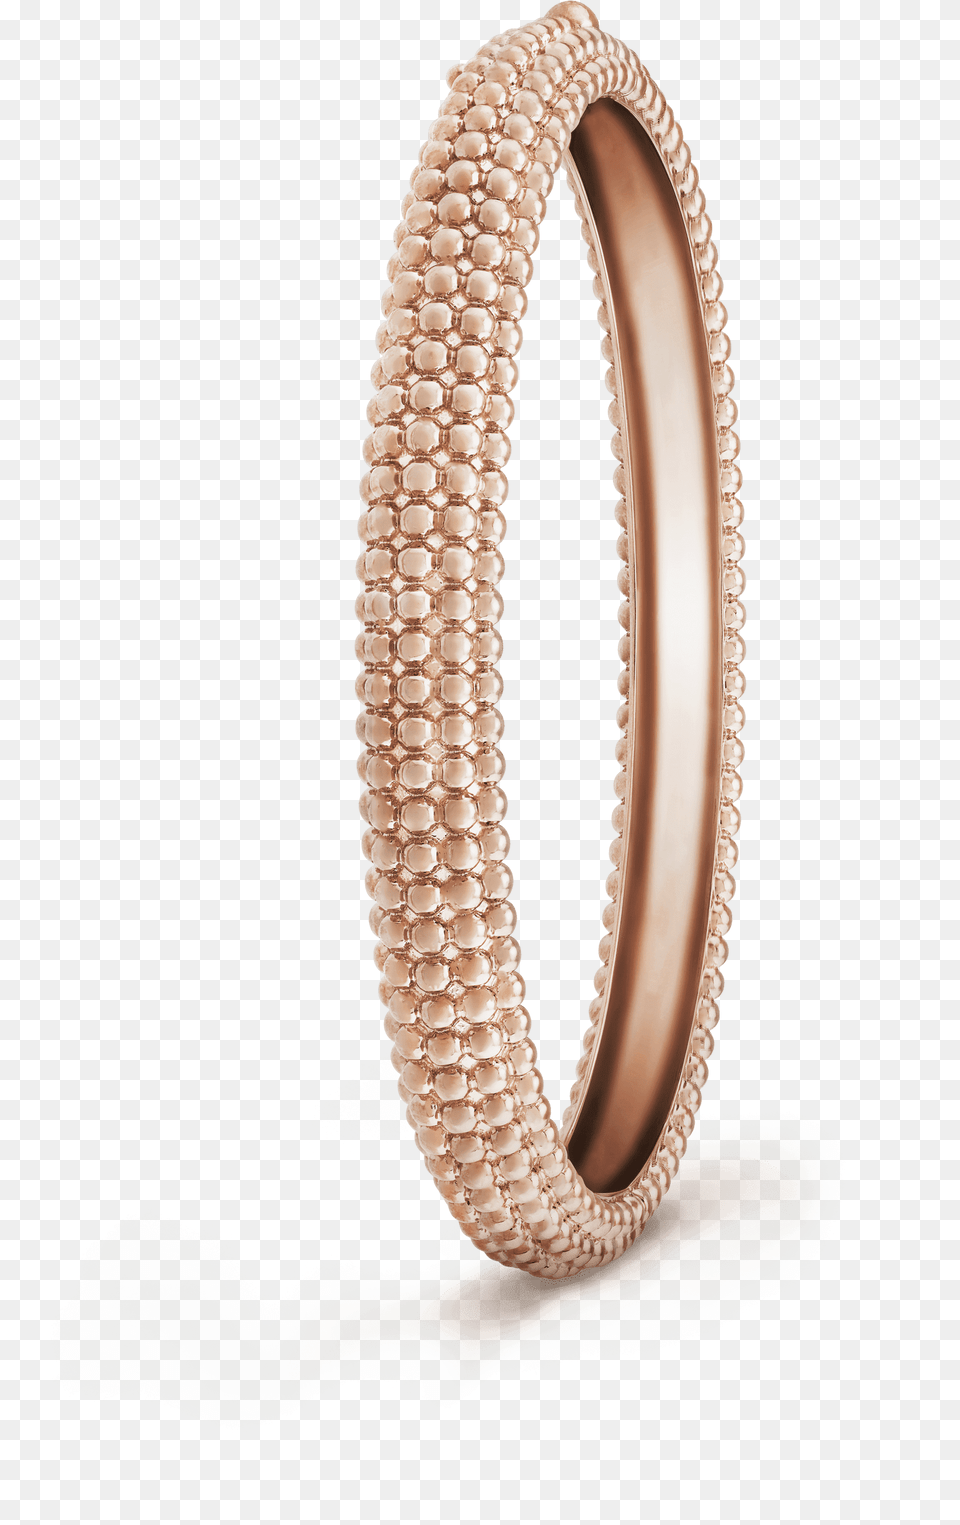 Perle Pearls Of Gold Bracelet 5 Rows Large Model Van Cleef Pearl Bracelet, Accessories, Jewelry, Ornament, Necklace Free Transparent Png